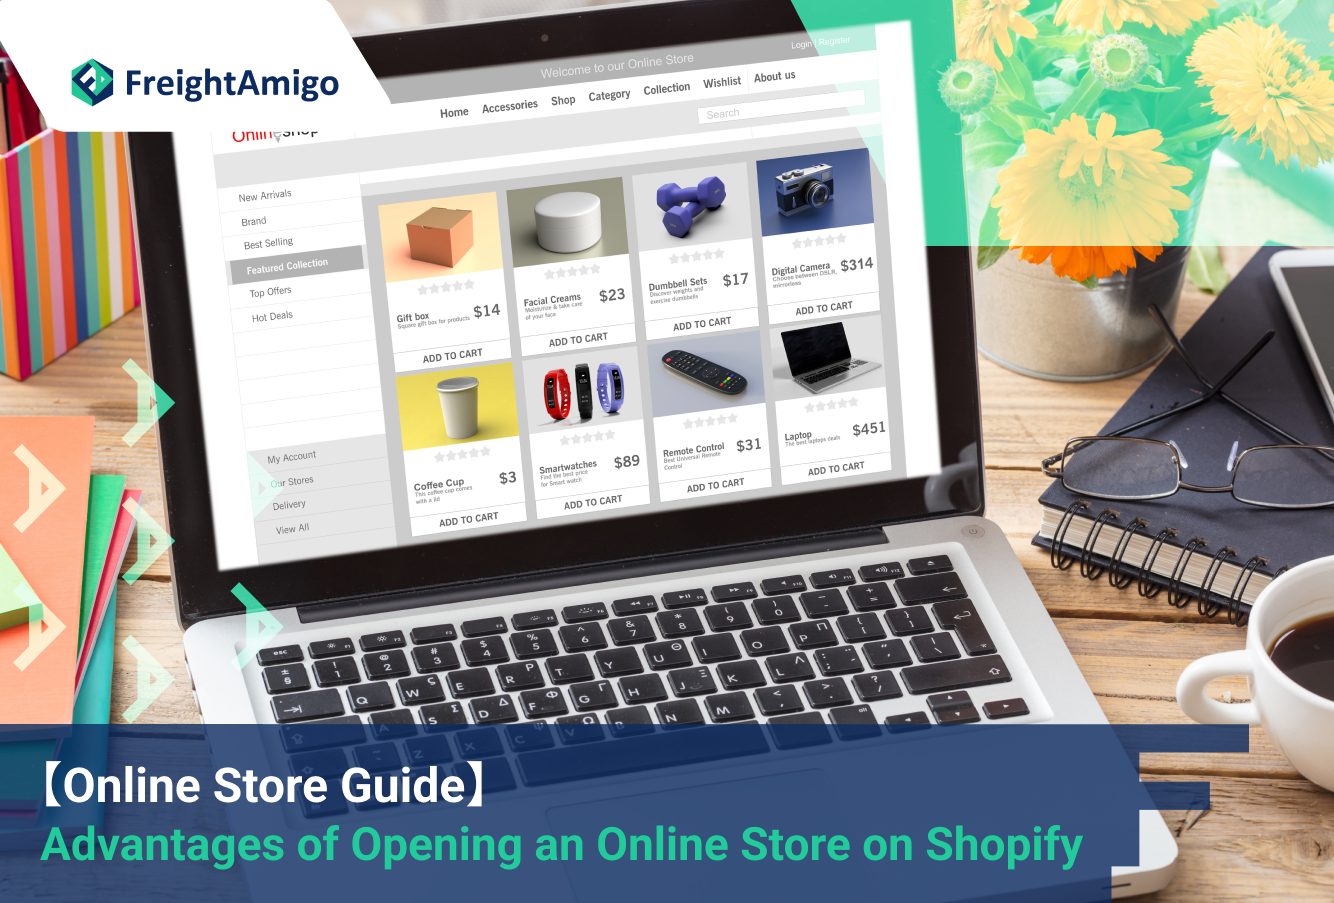 Online Store Guide: Advantages of Opening an Online Store on Shopify